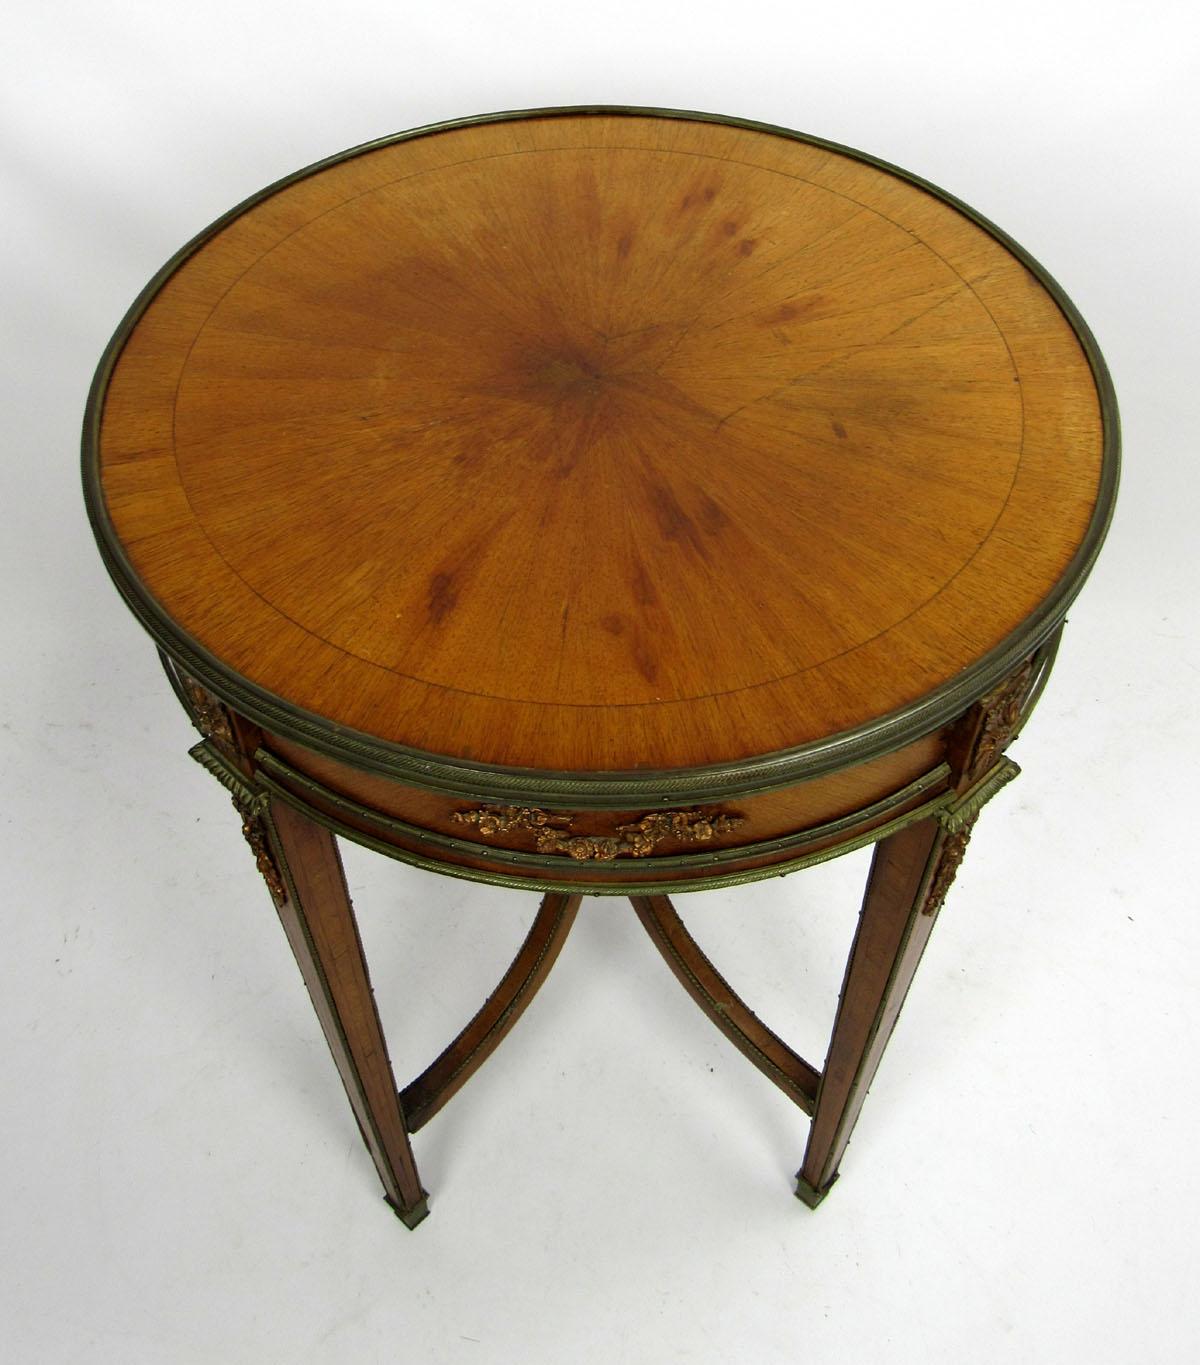 Early 20th century French round side table in a pale wooden finish with an inlaid central star, ormolu fittings with a copper-colored patina, and unique upraised stretchers topped with a crown gallery.